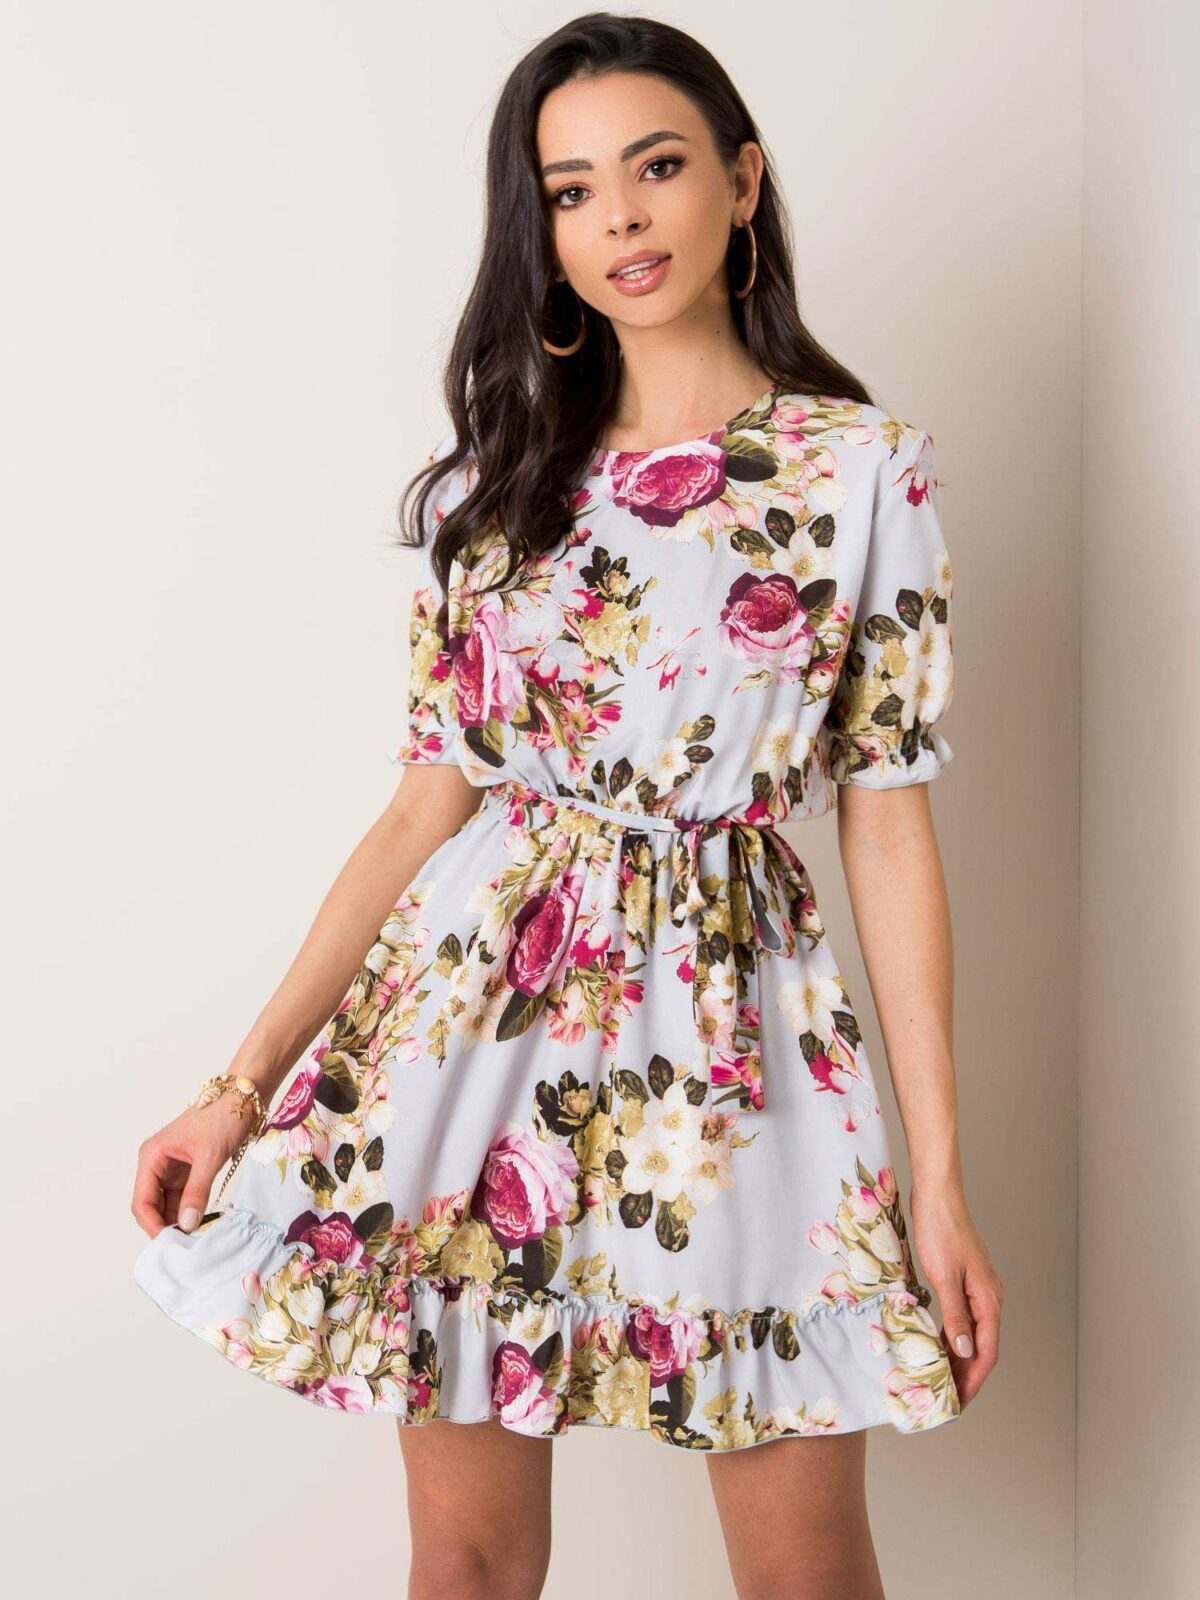 Gray floral dress with